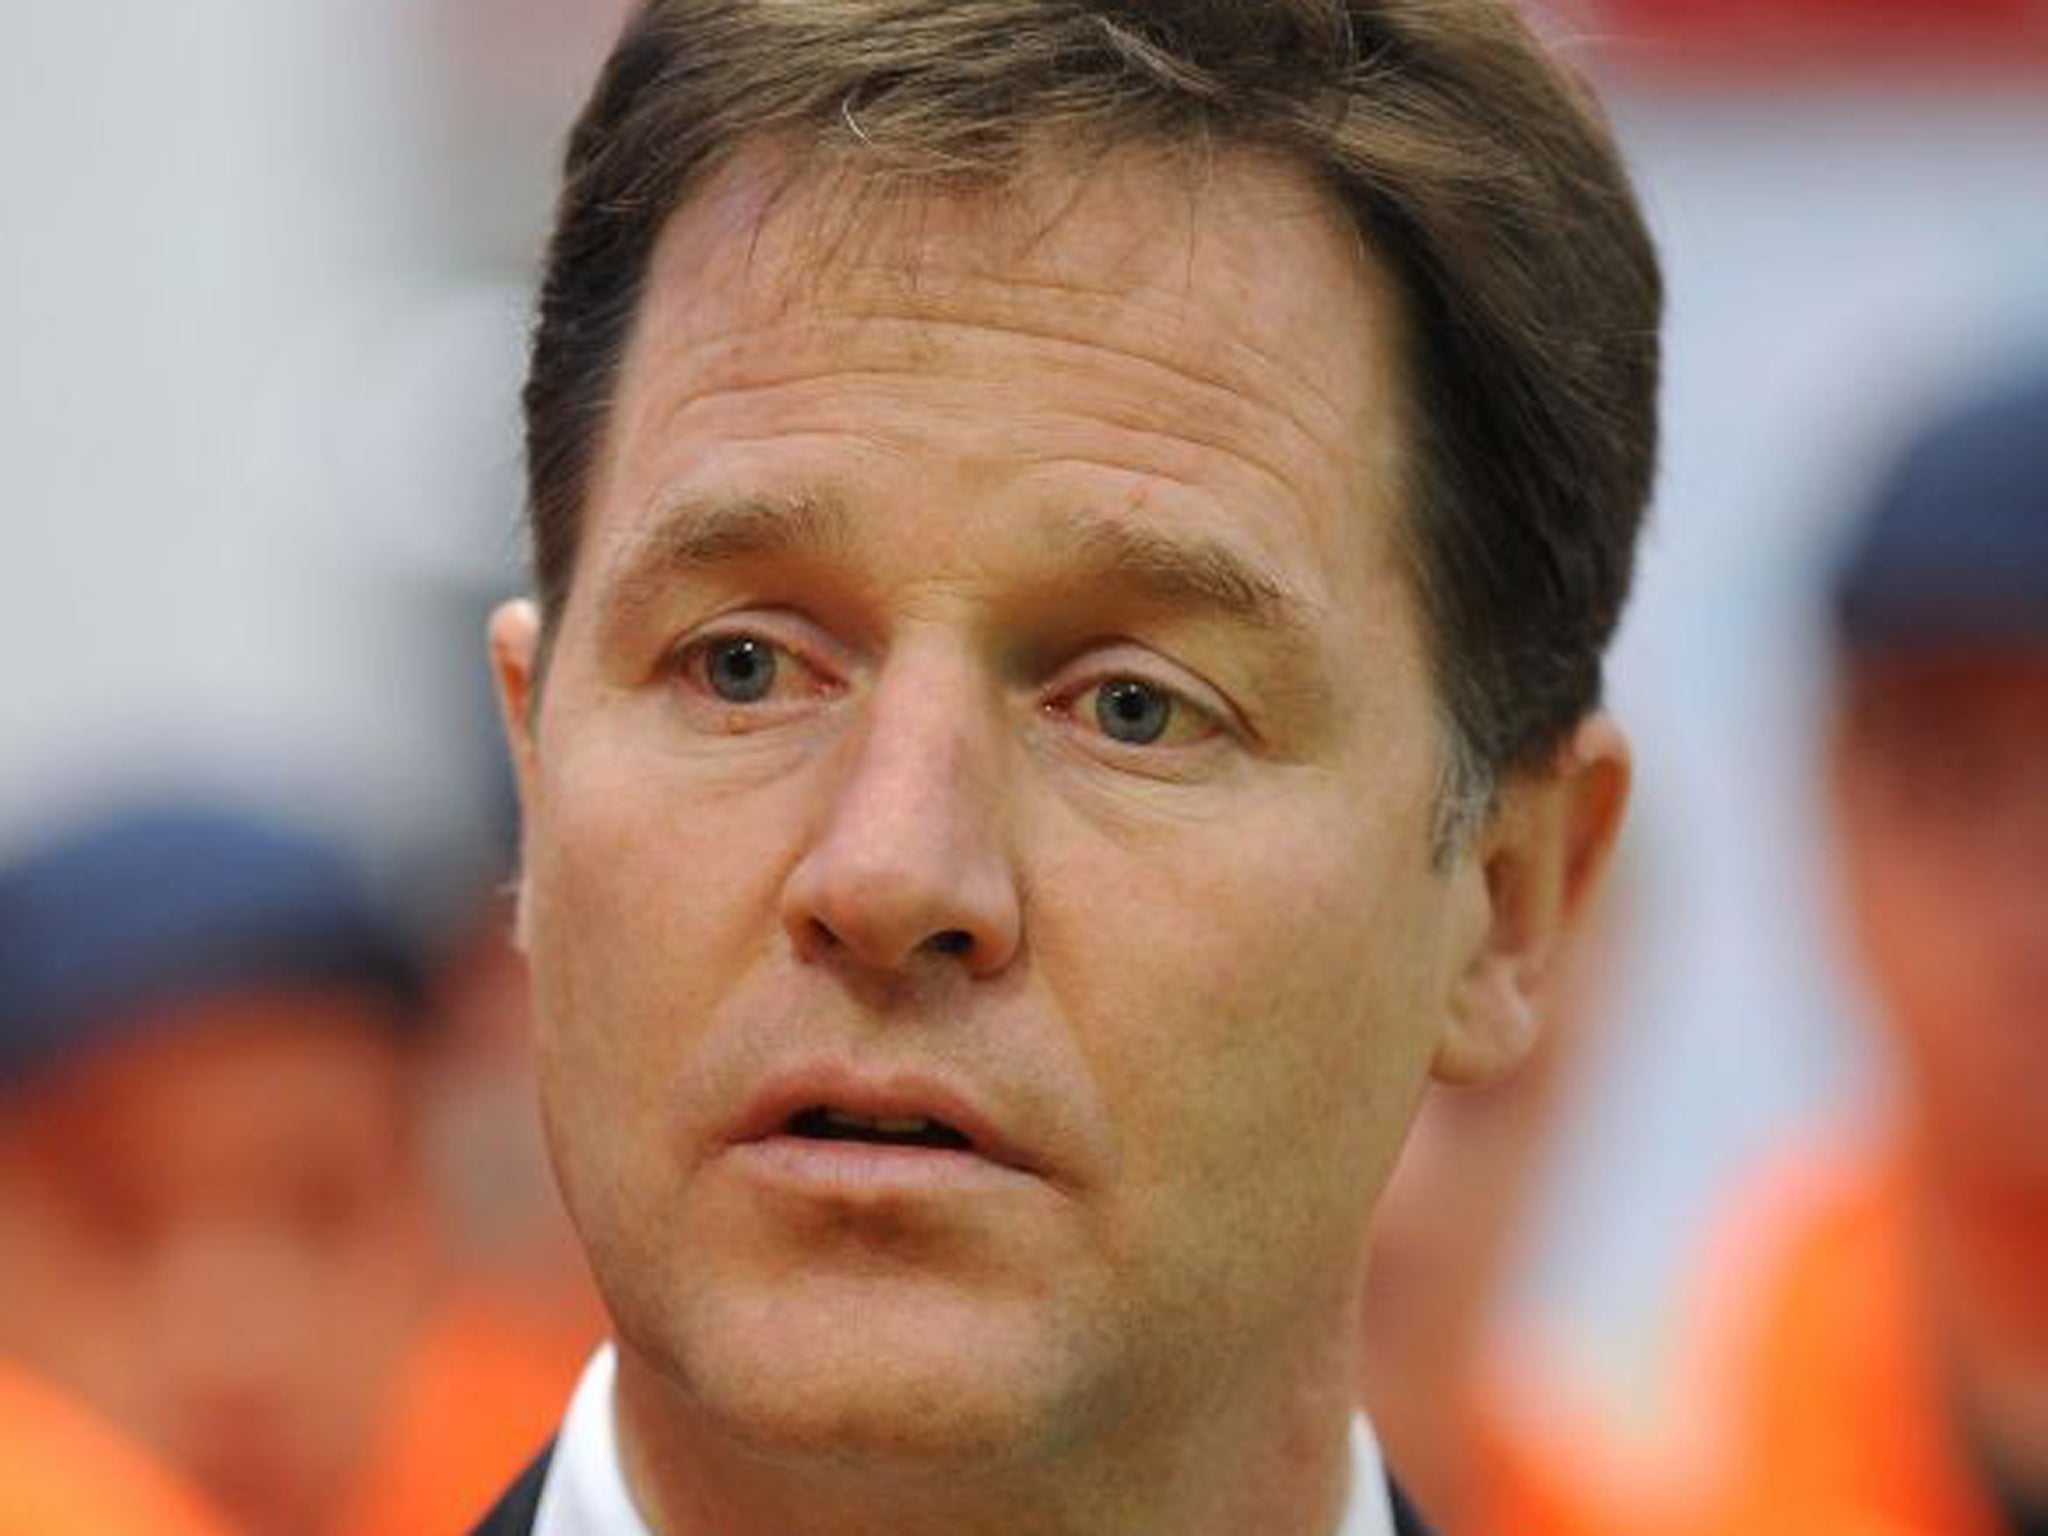 Nick Clegg accused Boris Johnson of talking about people as if they were a 'breed of dogs'